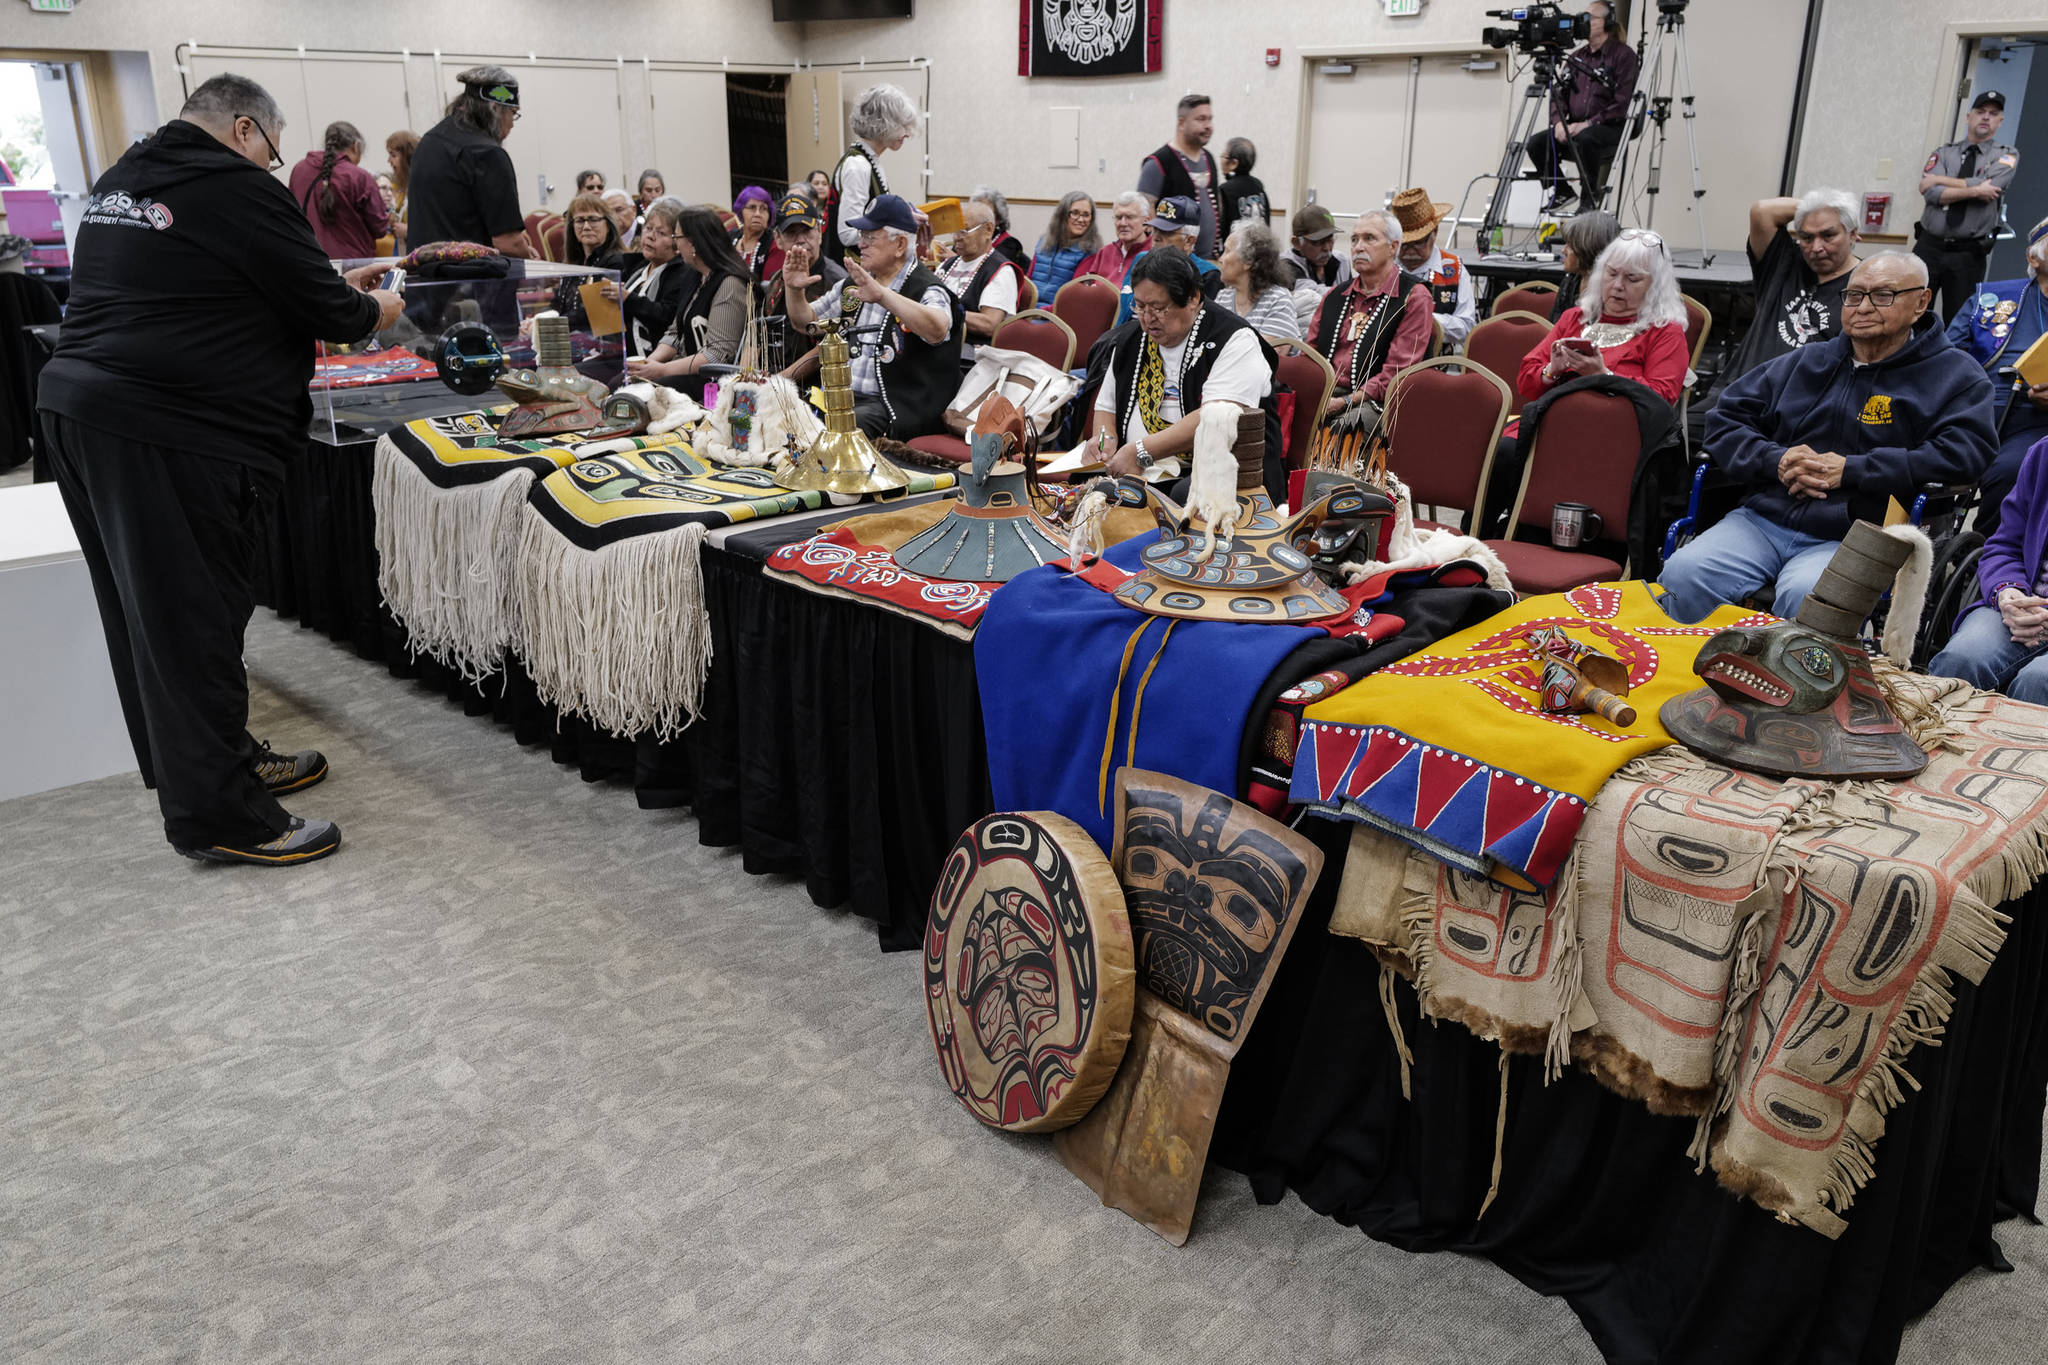 Tlingit clans display their regalia before a welcoming ceremony at Elizabeth Peratrovich Hall on Wednesday, Sept. 25, 2019. (Michael Penn | Juneau Empire)